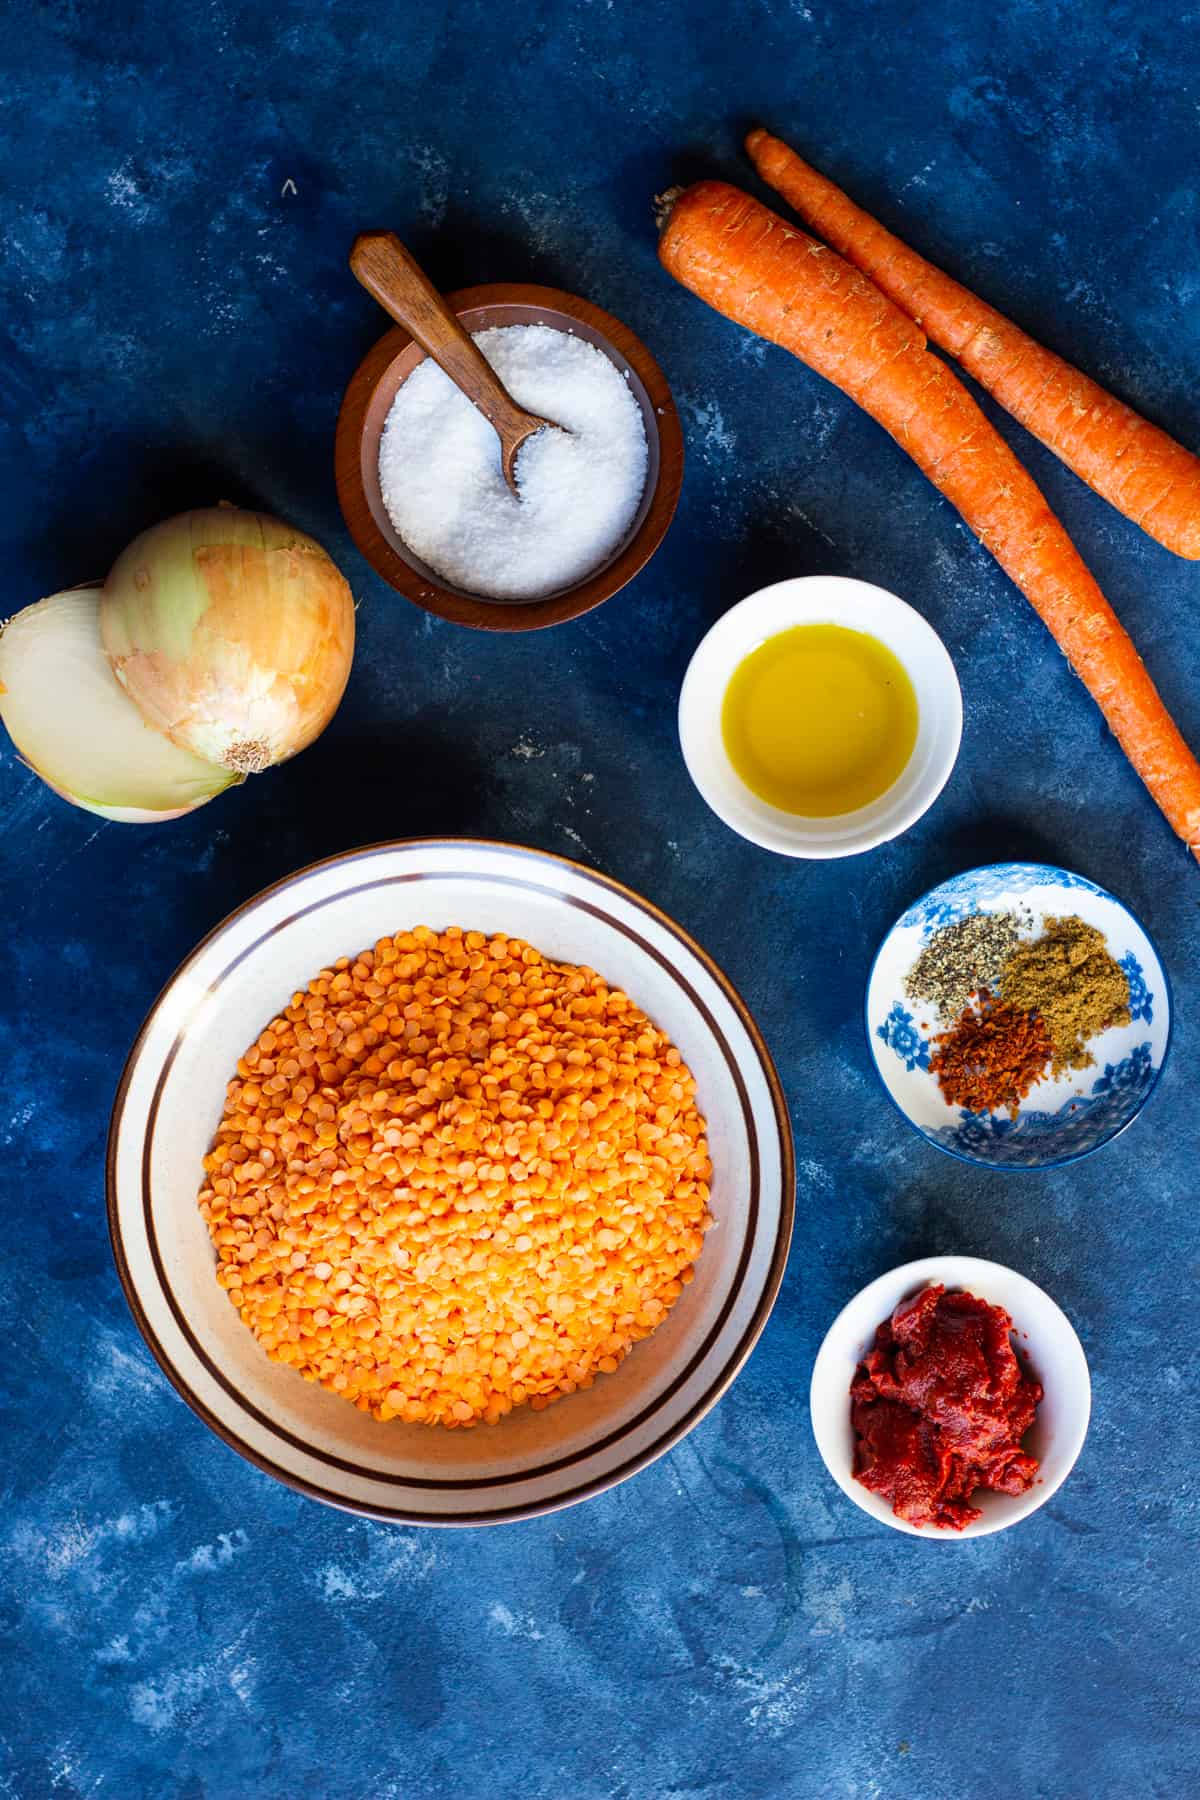 To make mercimek corbasi you need red lentils, tomato paste, spices, olive oil, onion and carrots. 